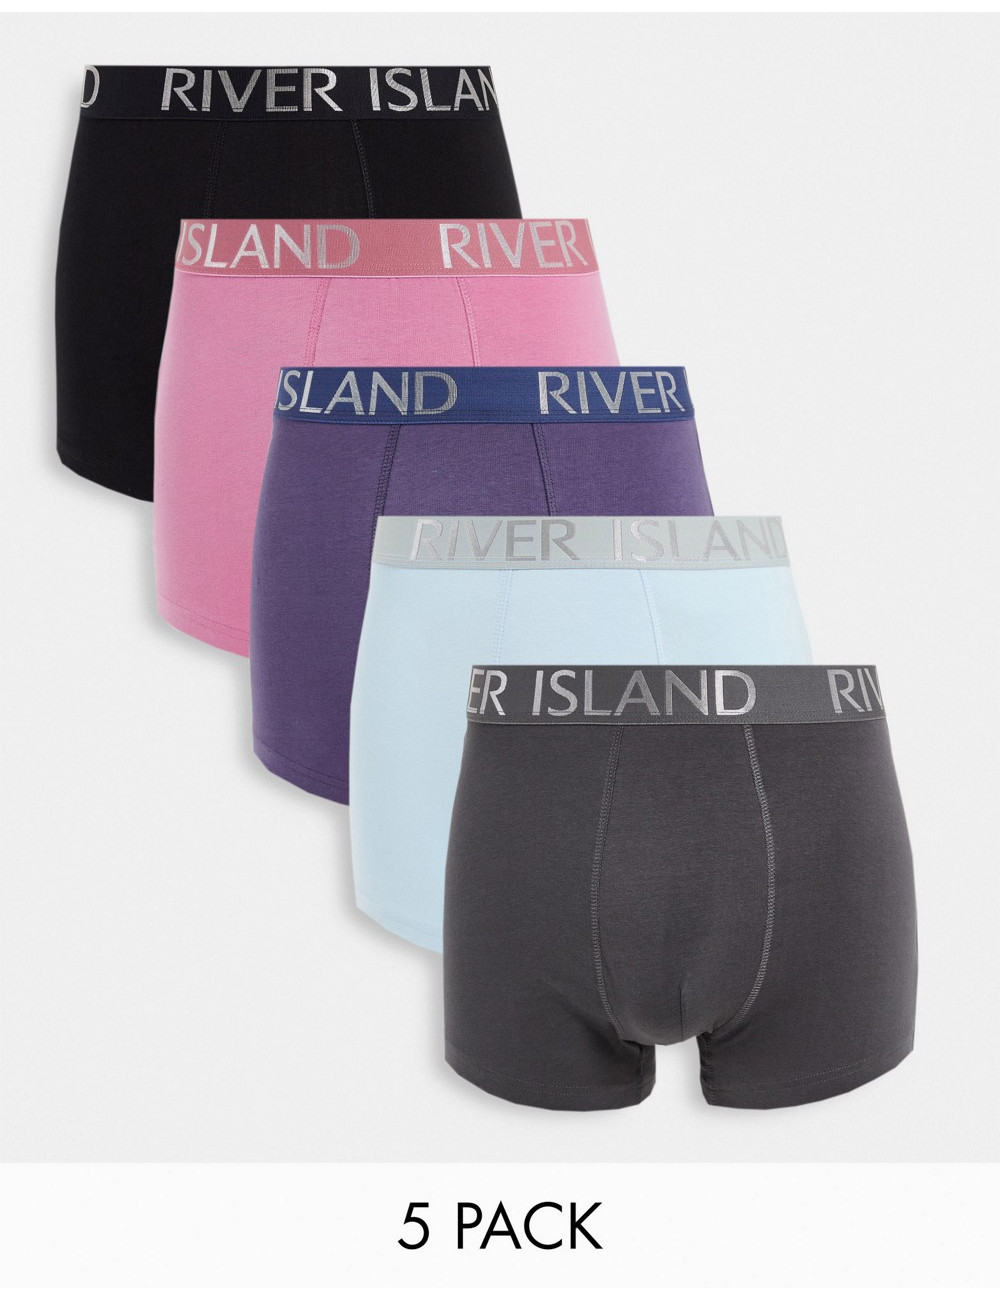 River Island 5 pack boxers...